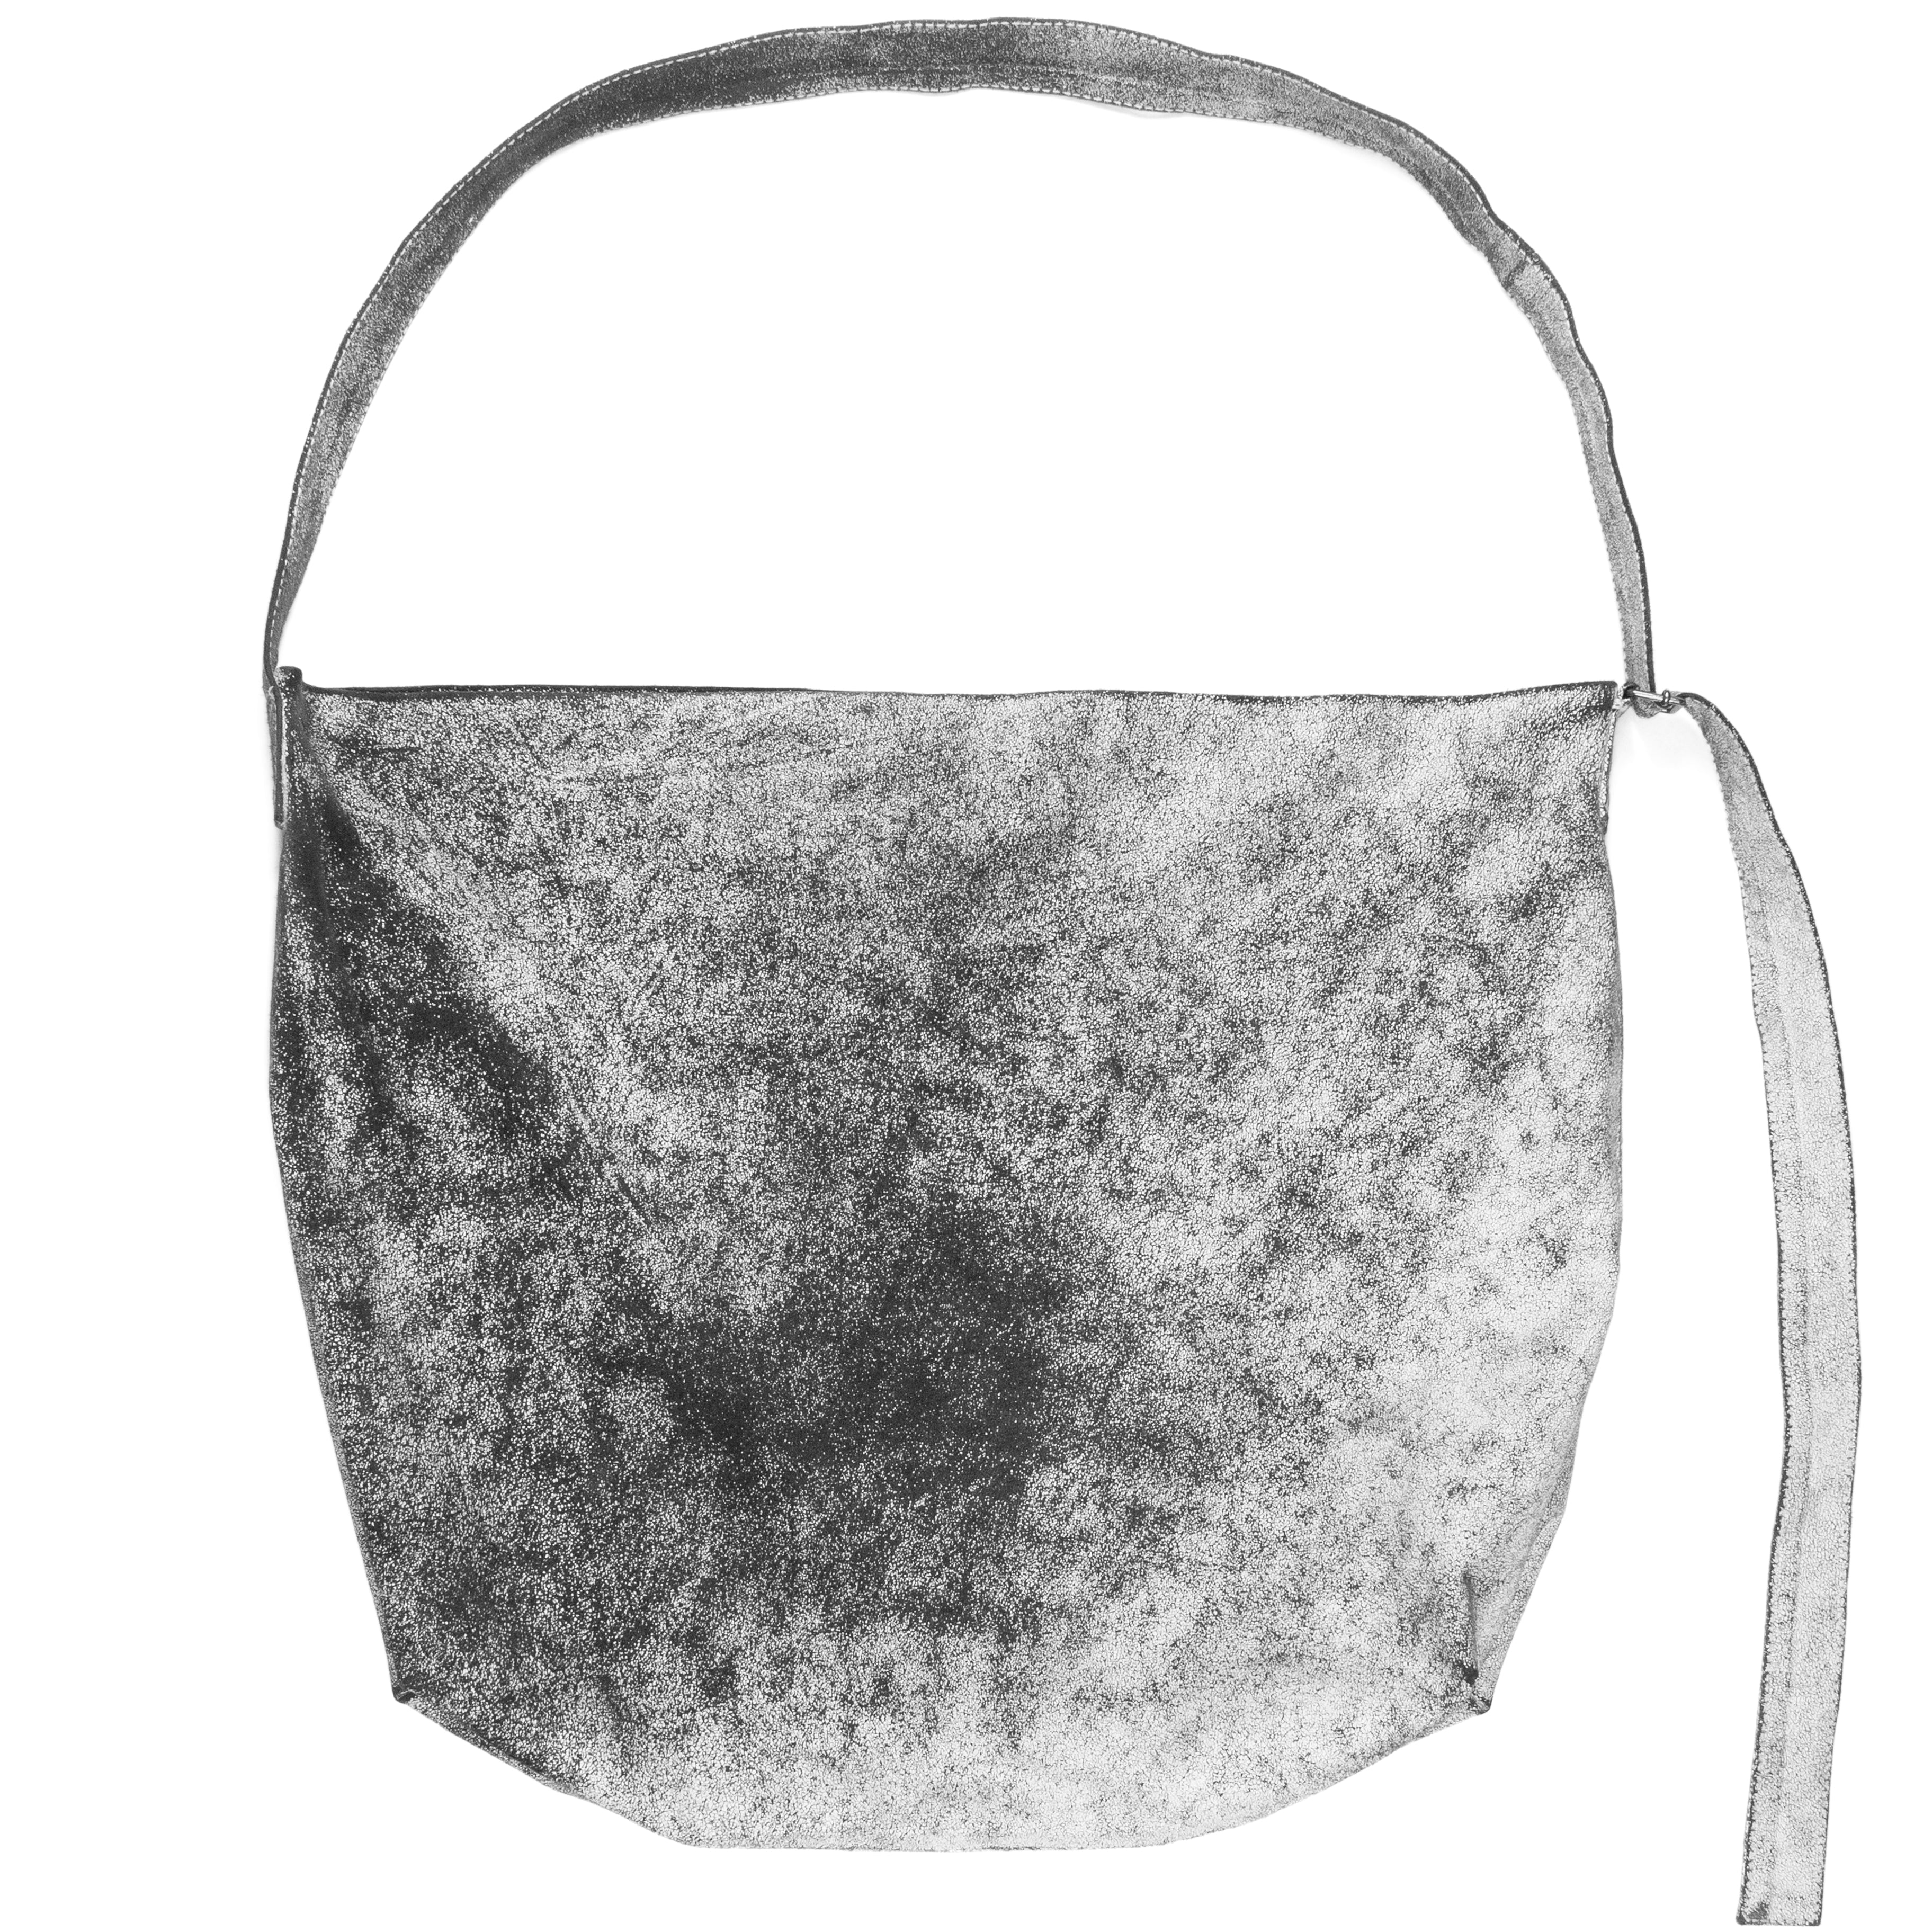 Ann Demeulemeester Cracked Painted Leather Bag - SS02 - SILVER LEAGUE